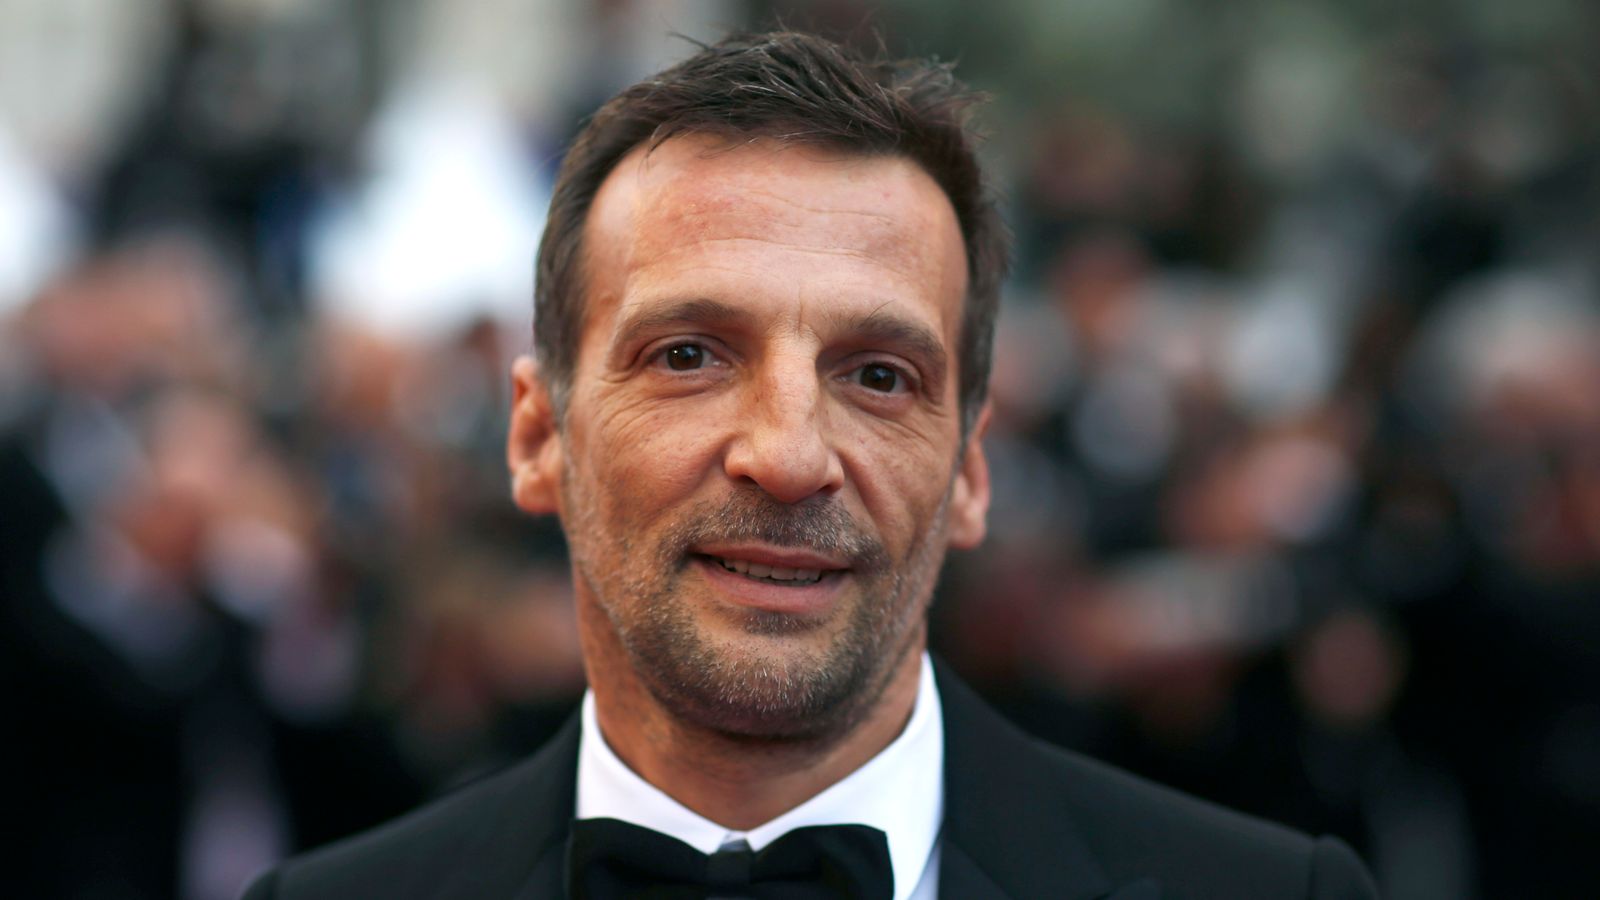 Mathieu Kassovitz: French actor and La Haine director ‘seriously injured’ in motorbike accident